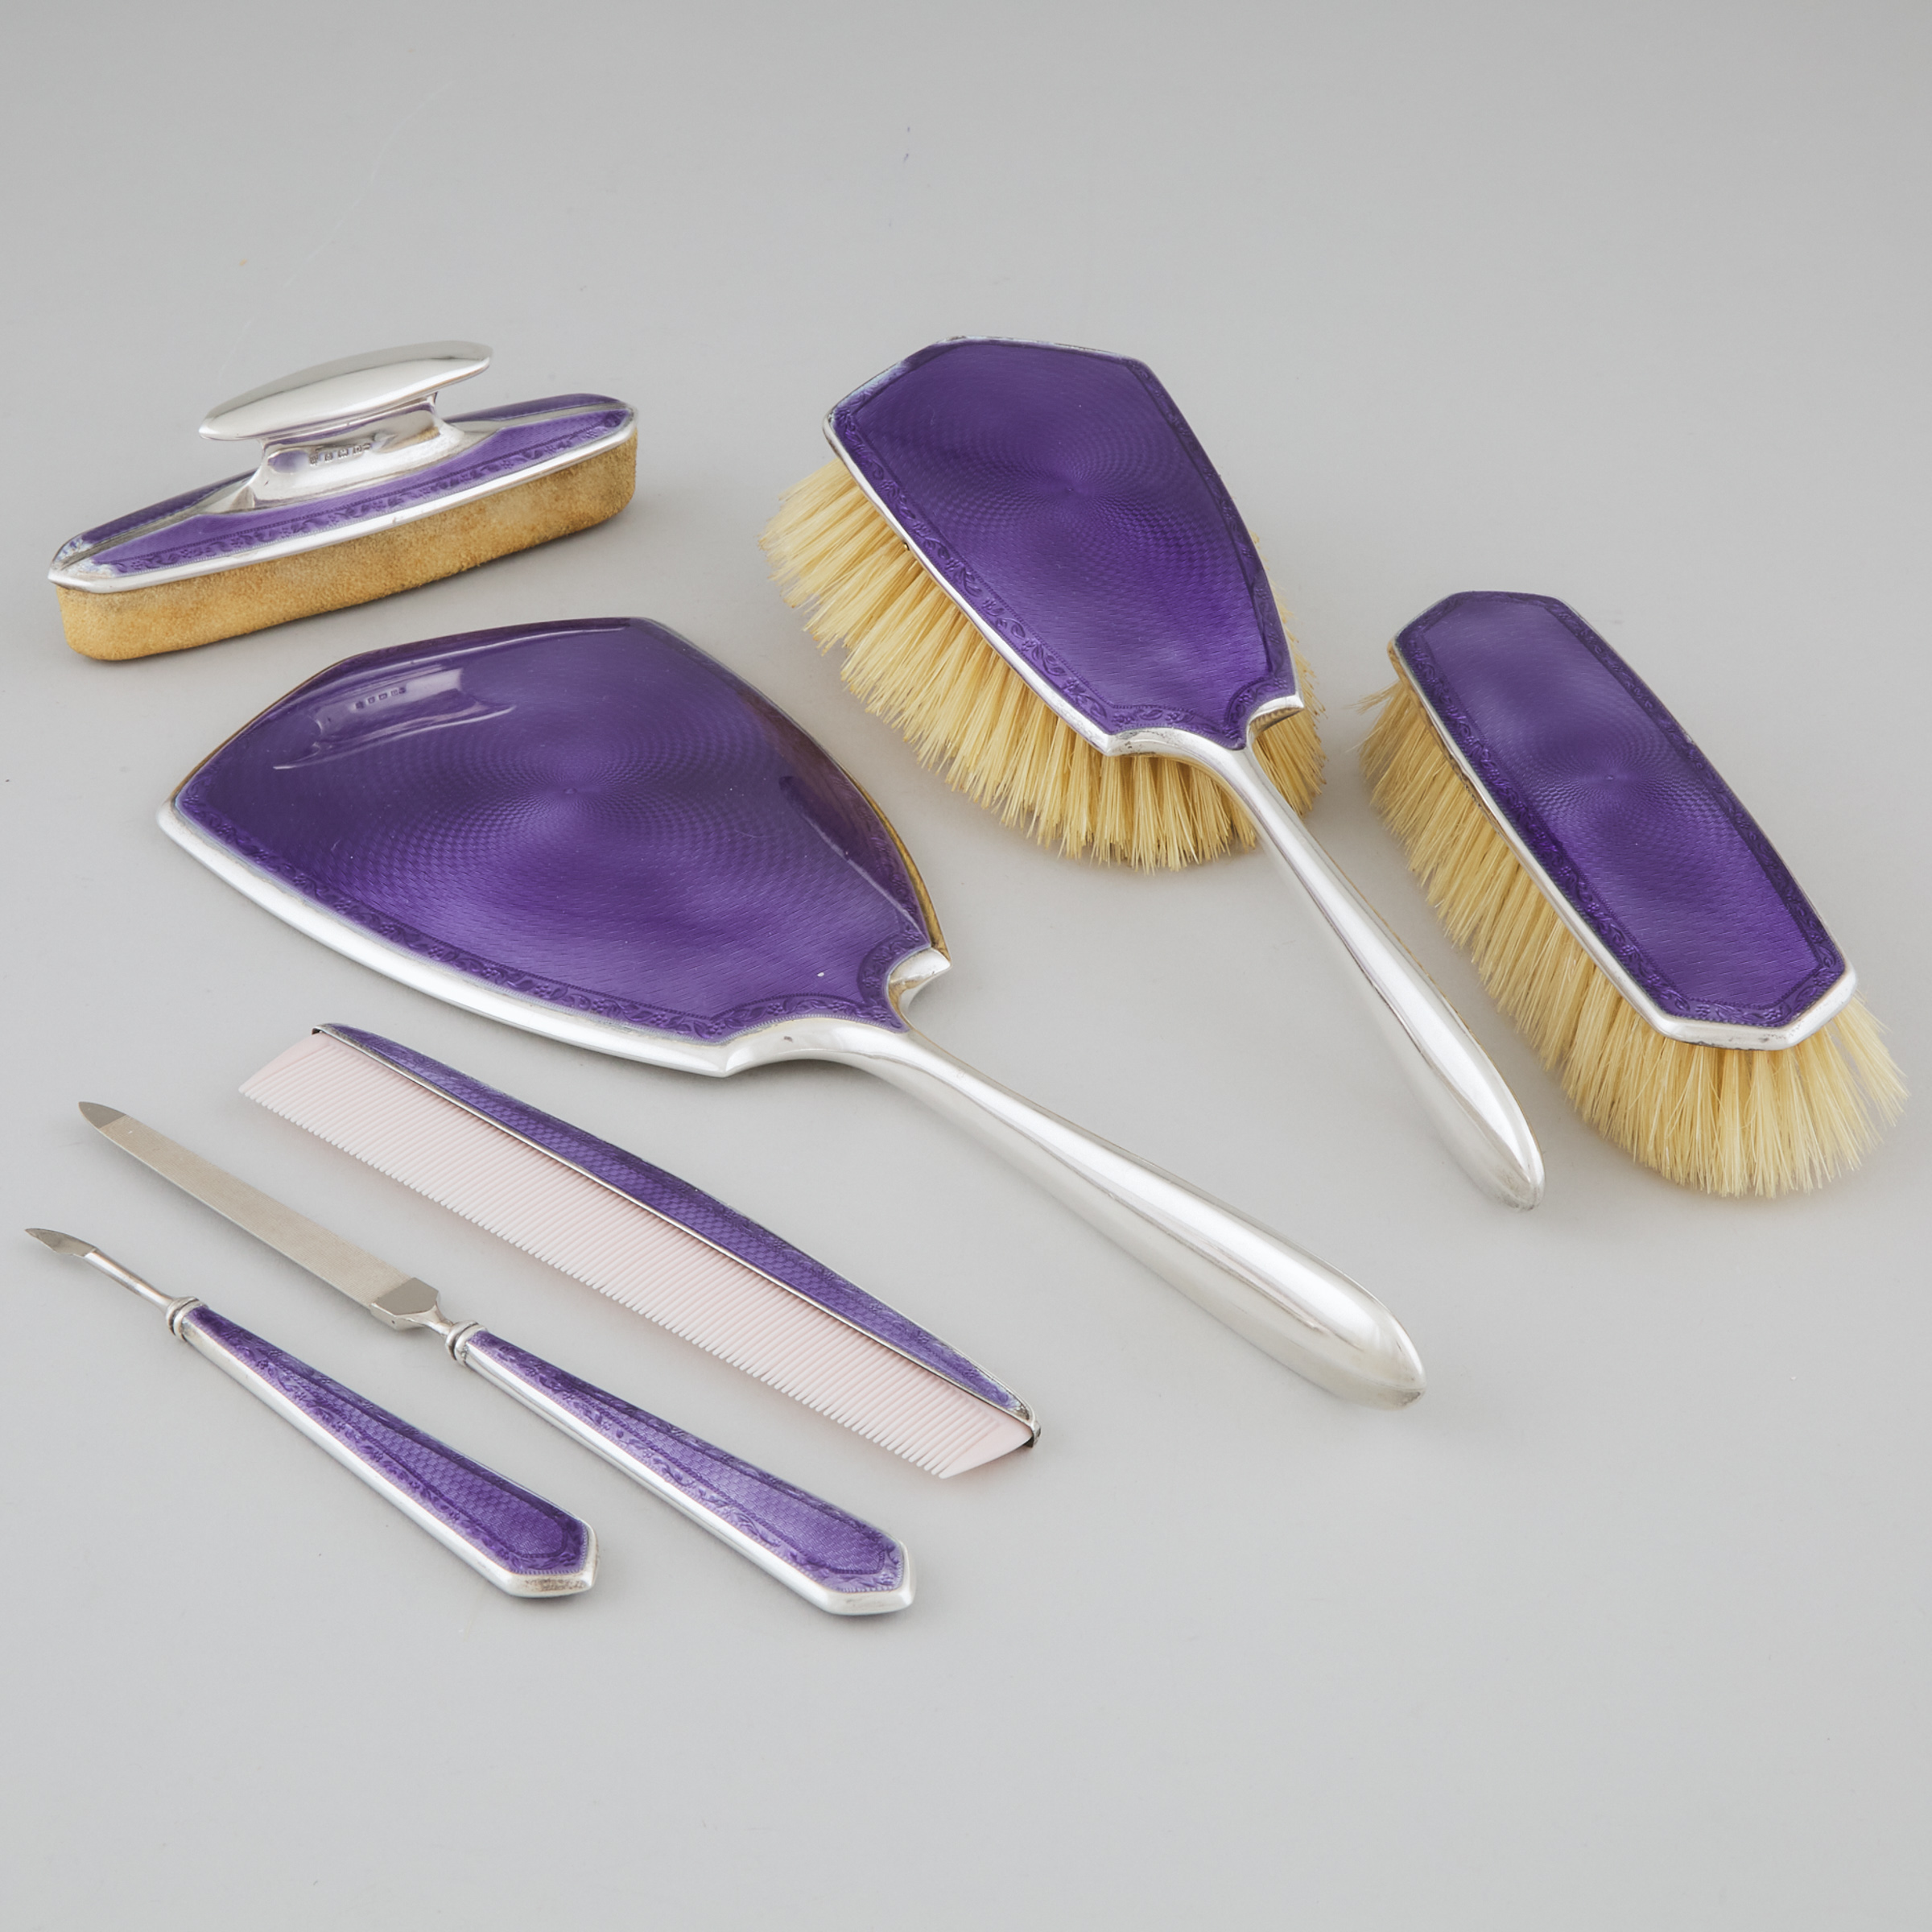 English Silver and Guilloché Translucent Purple Enamel Mounted Dresing Table Set, Charles S. Green & Co., Birmingham, 1927-28